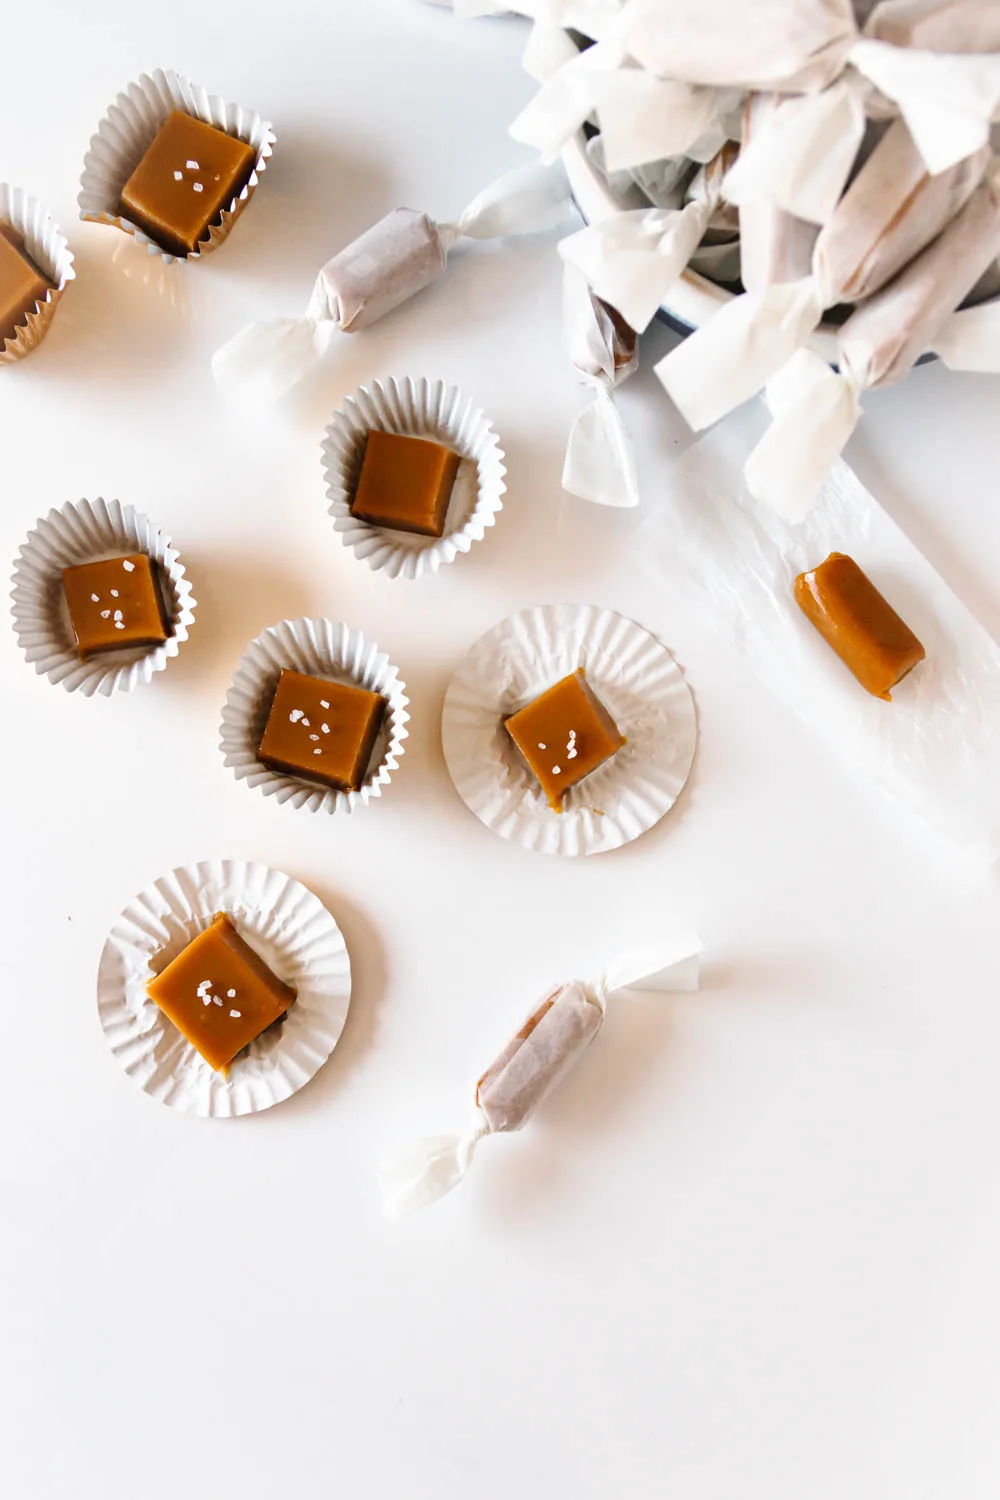 overhead view of the caramels - some wrapped in wax paper and some sitting in cupcake liners - scattered over a white surface